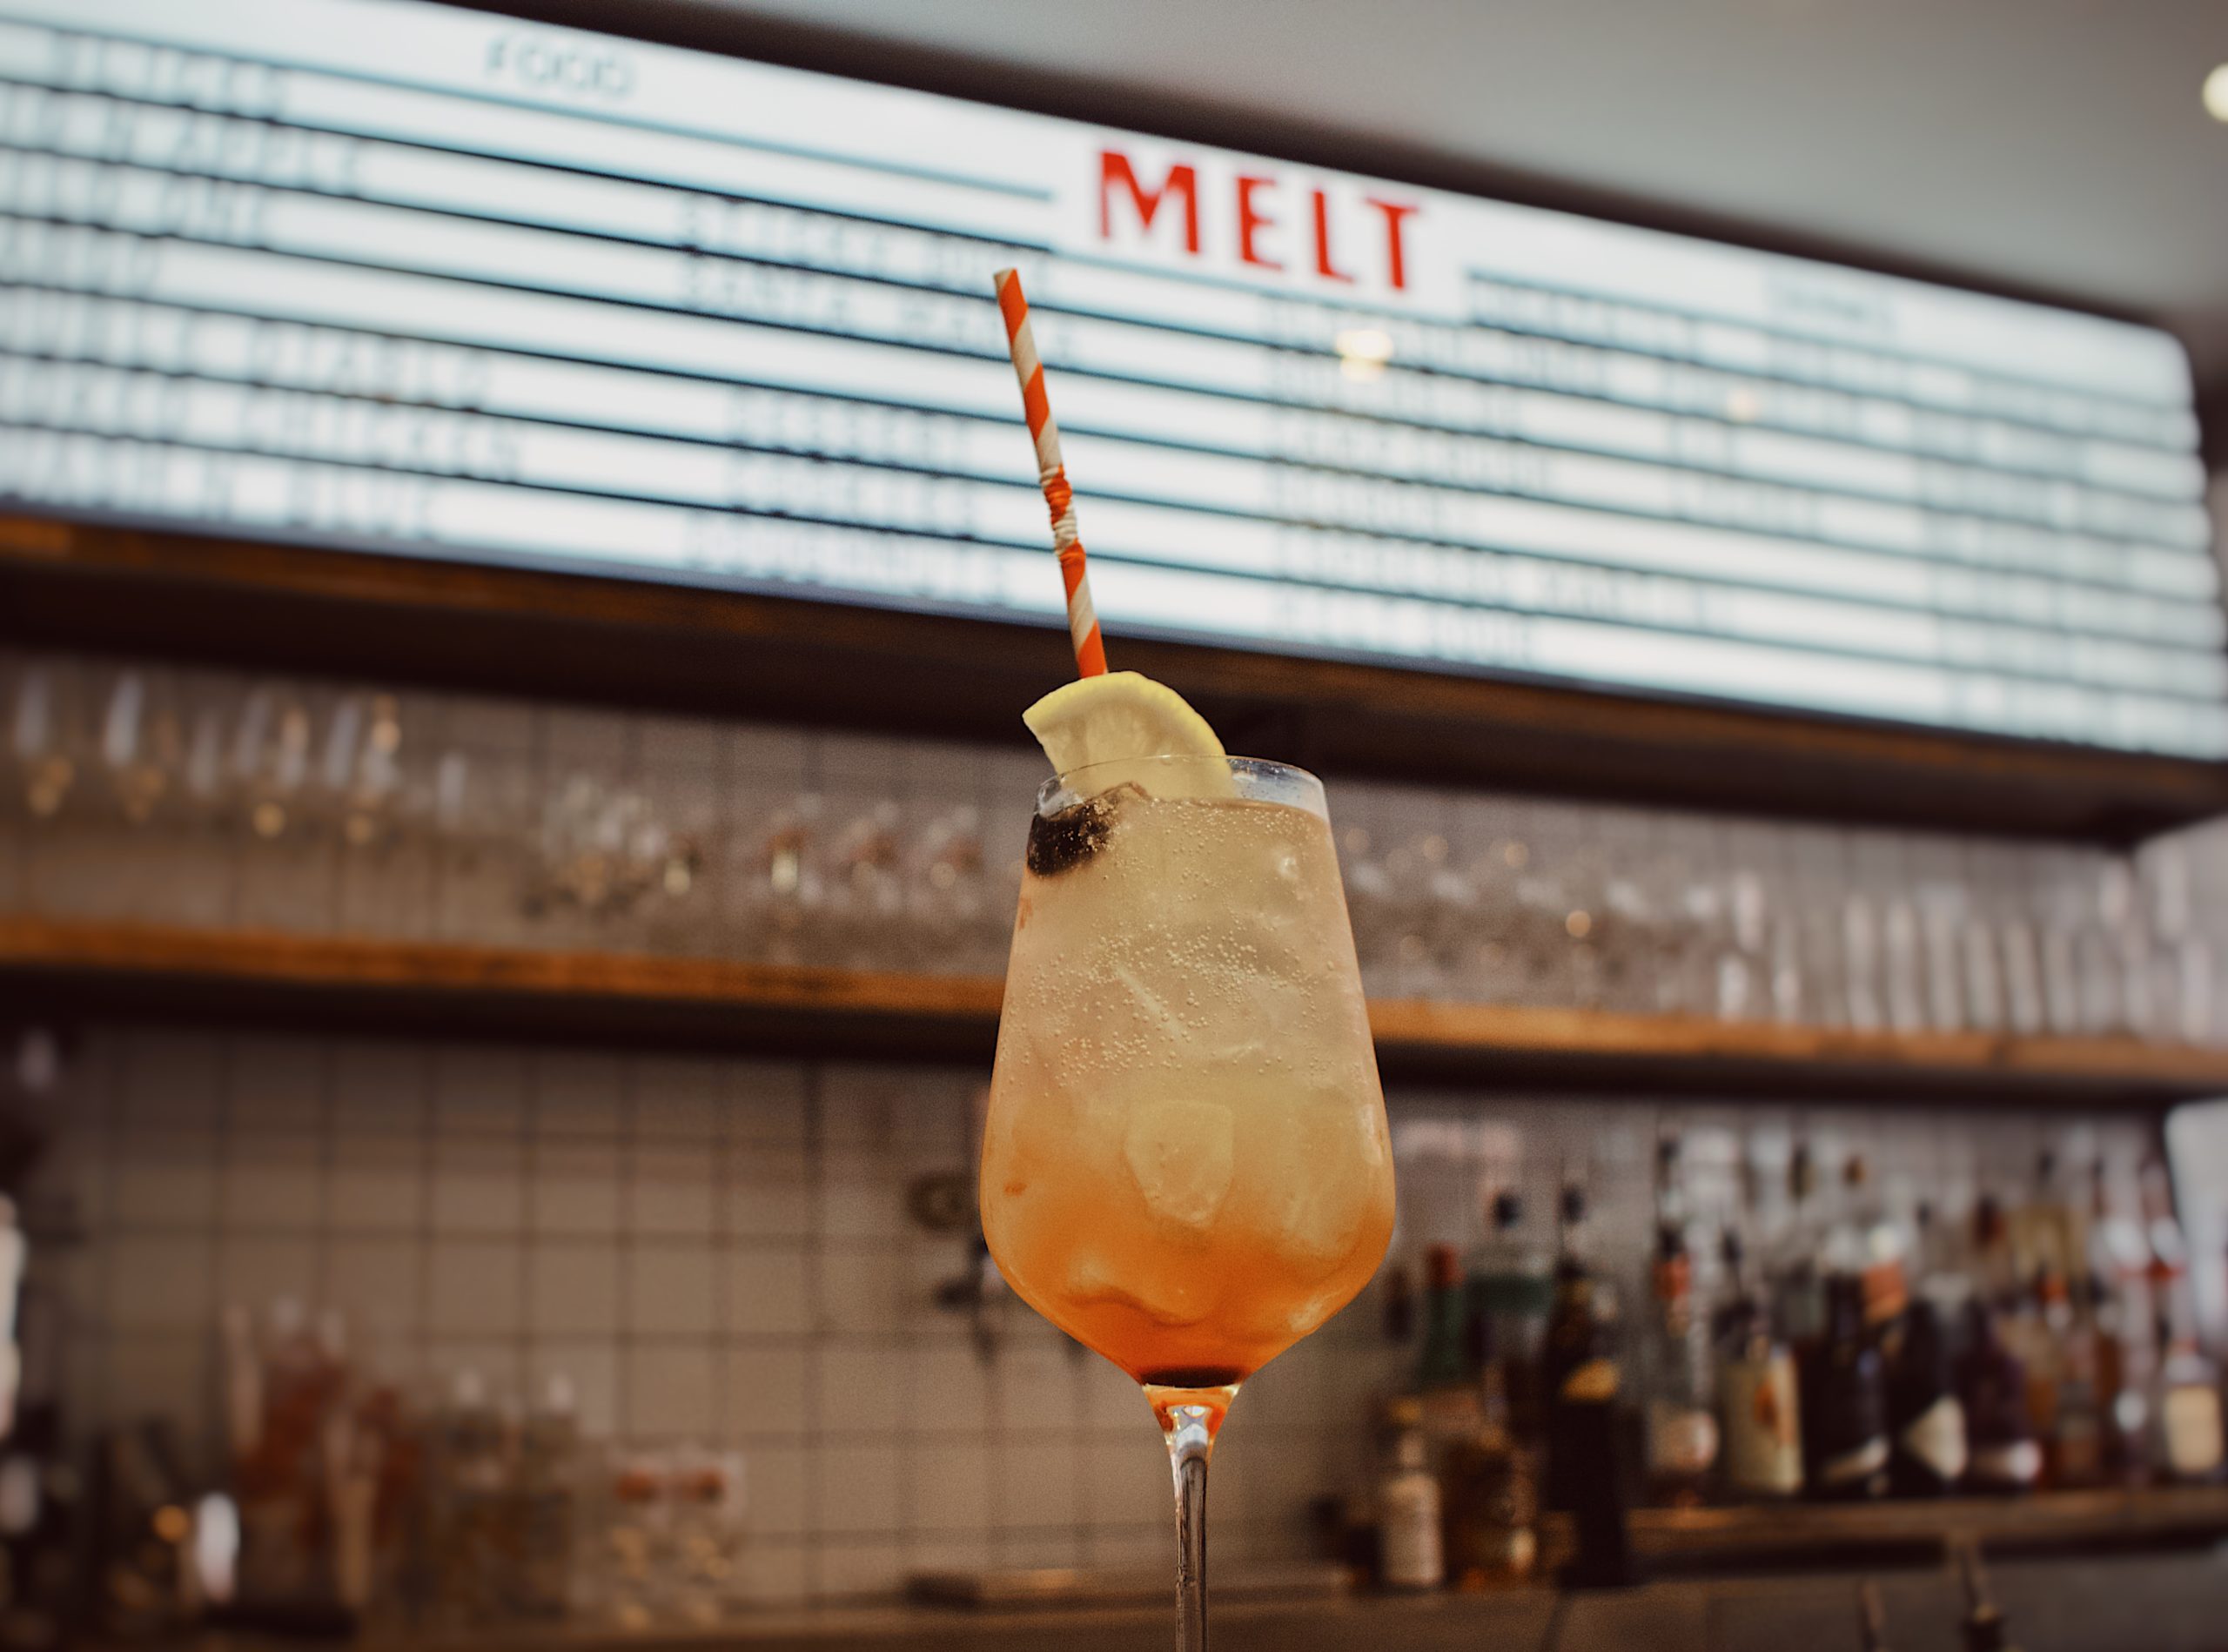 How to make a MELT Bakewell Spritz at home